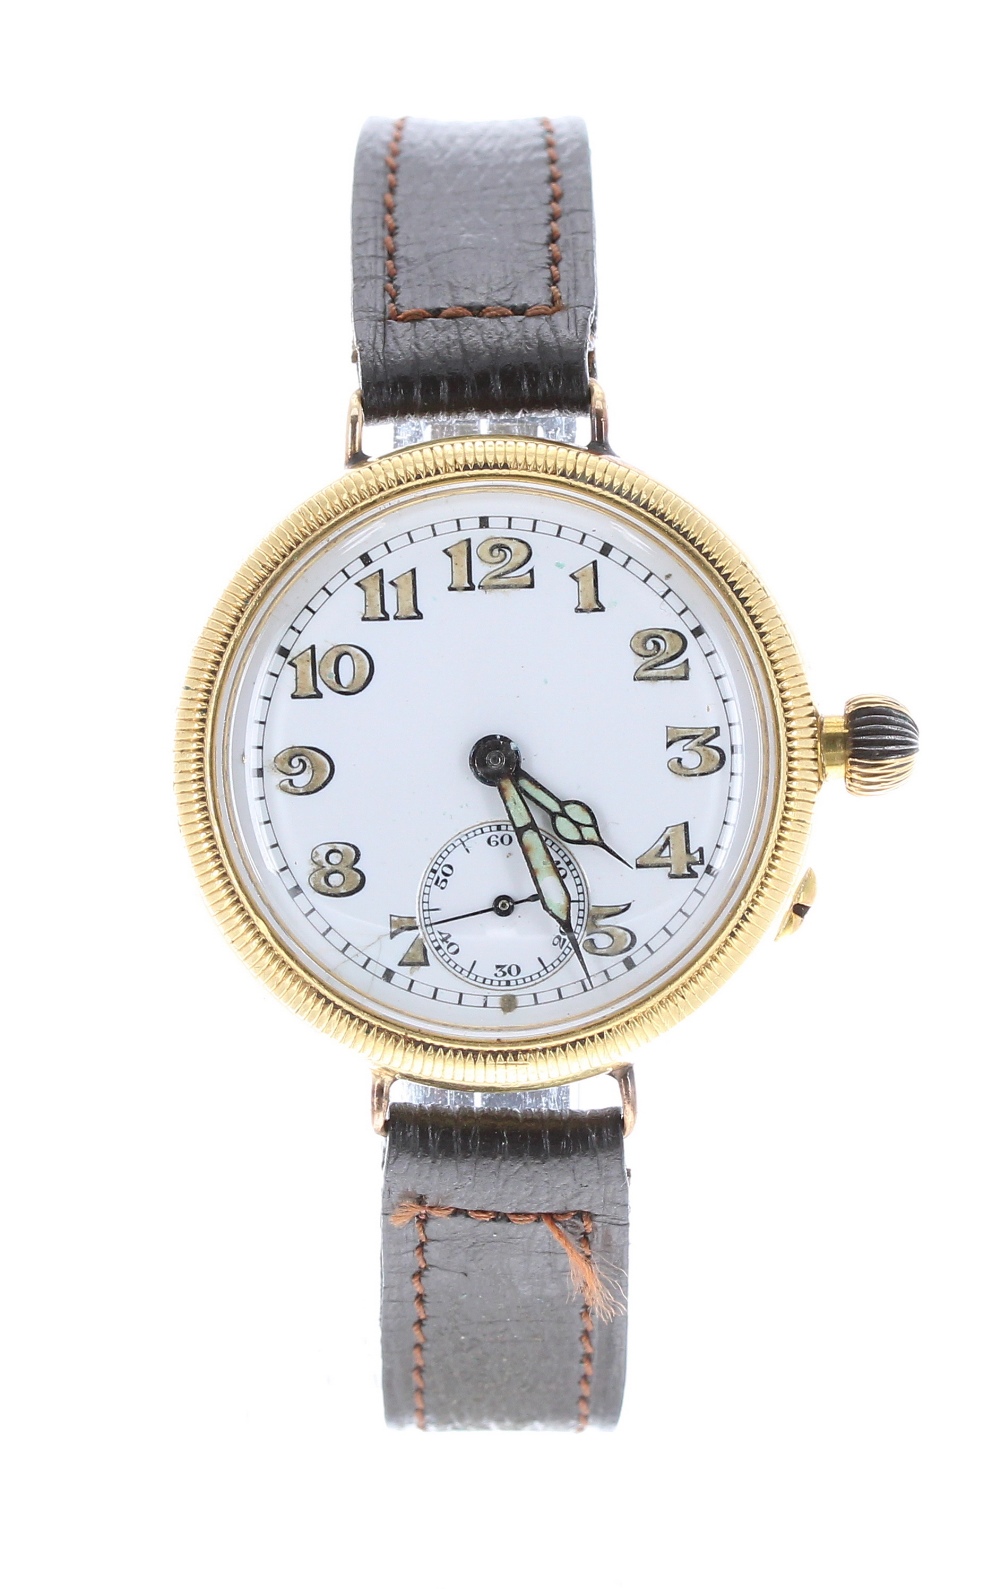 Baume & Co. 18ct Borgel wire-lug officers wristwatch, import hallmarks for London 1925, white enamel